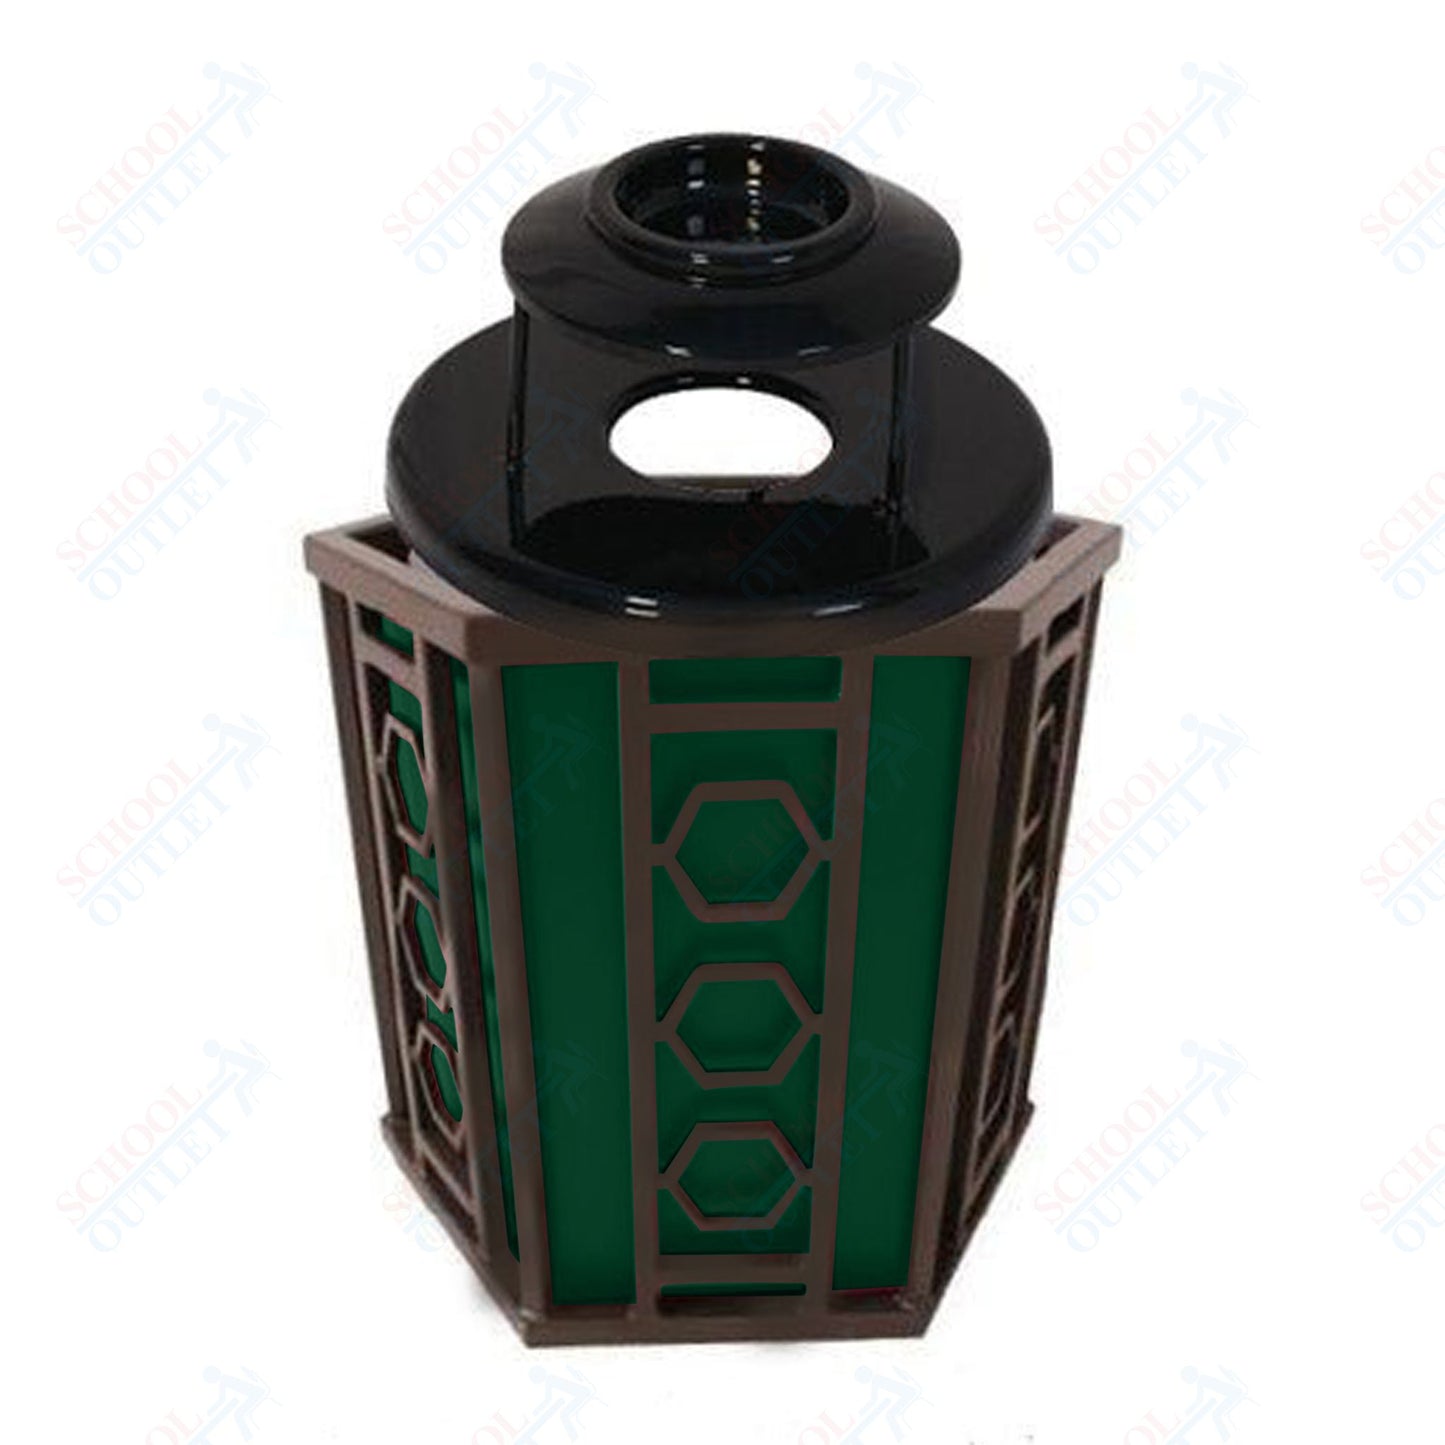 UltraPlay Huntington Trash Receptacle With Ash Urn Lid and Heavy Duty Plastic Liner - 32 Gallon